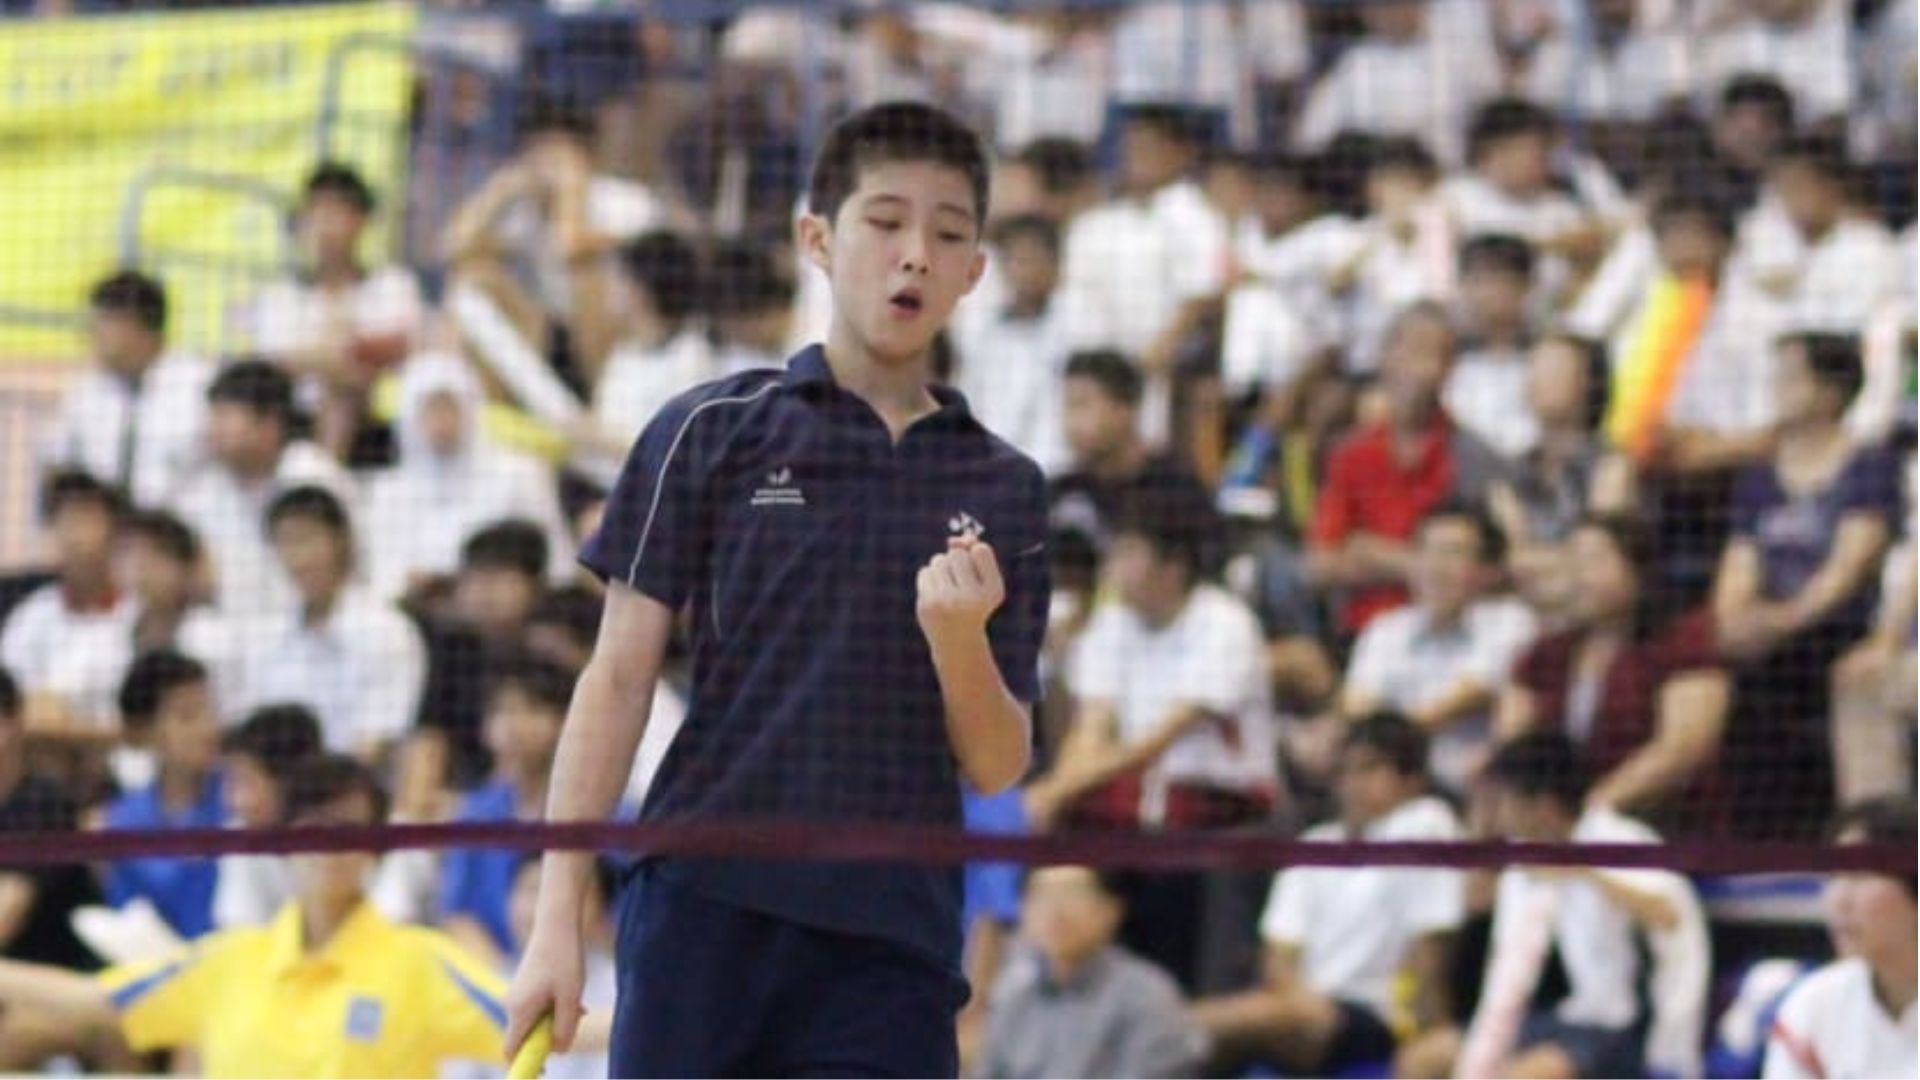 Passion for gold: Singapore shuttler Loh Kean Yew